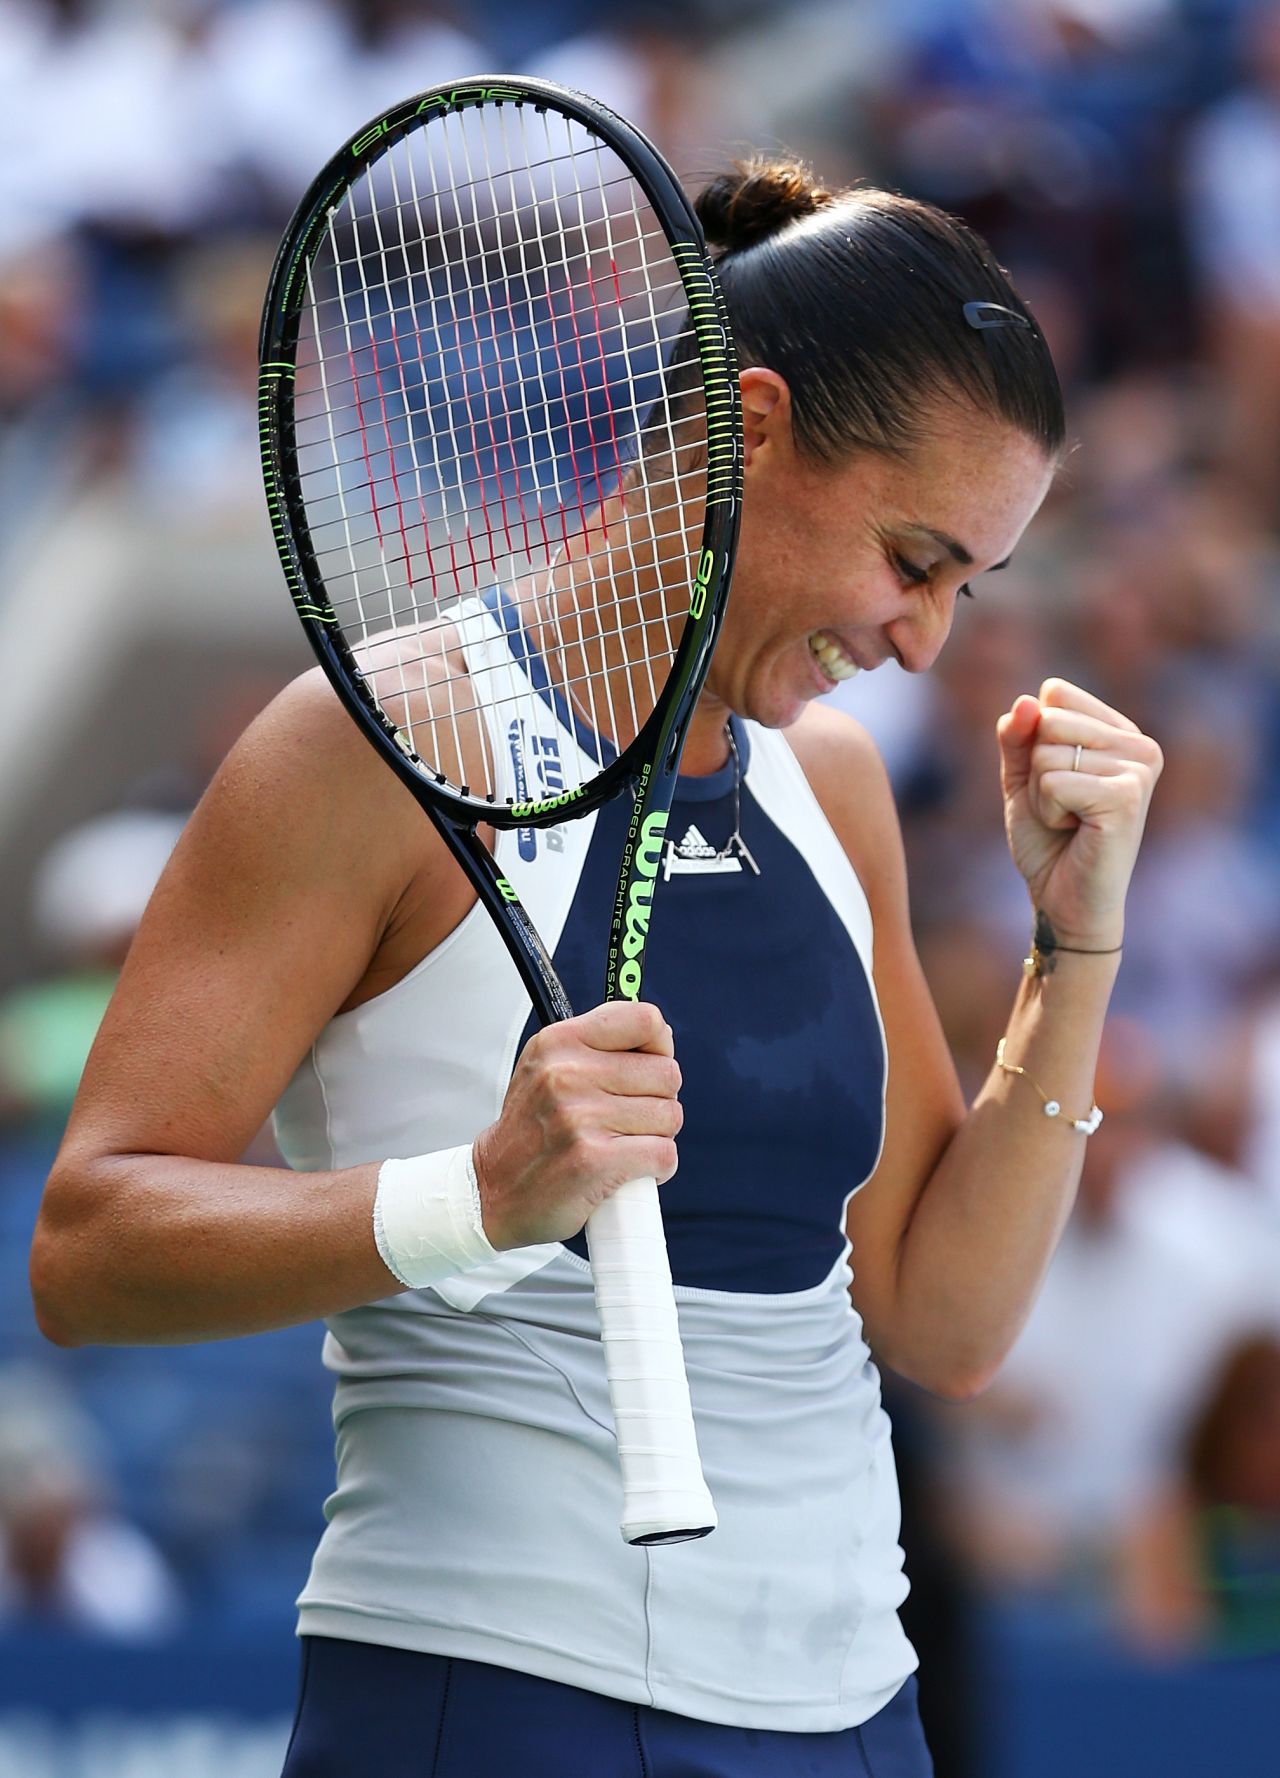 Pennetta's victory means Italy, for the first time, will have two women in the singles semifinals at the same grand slam tournament.